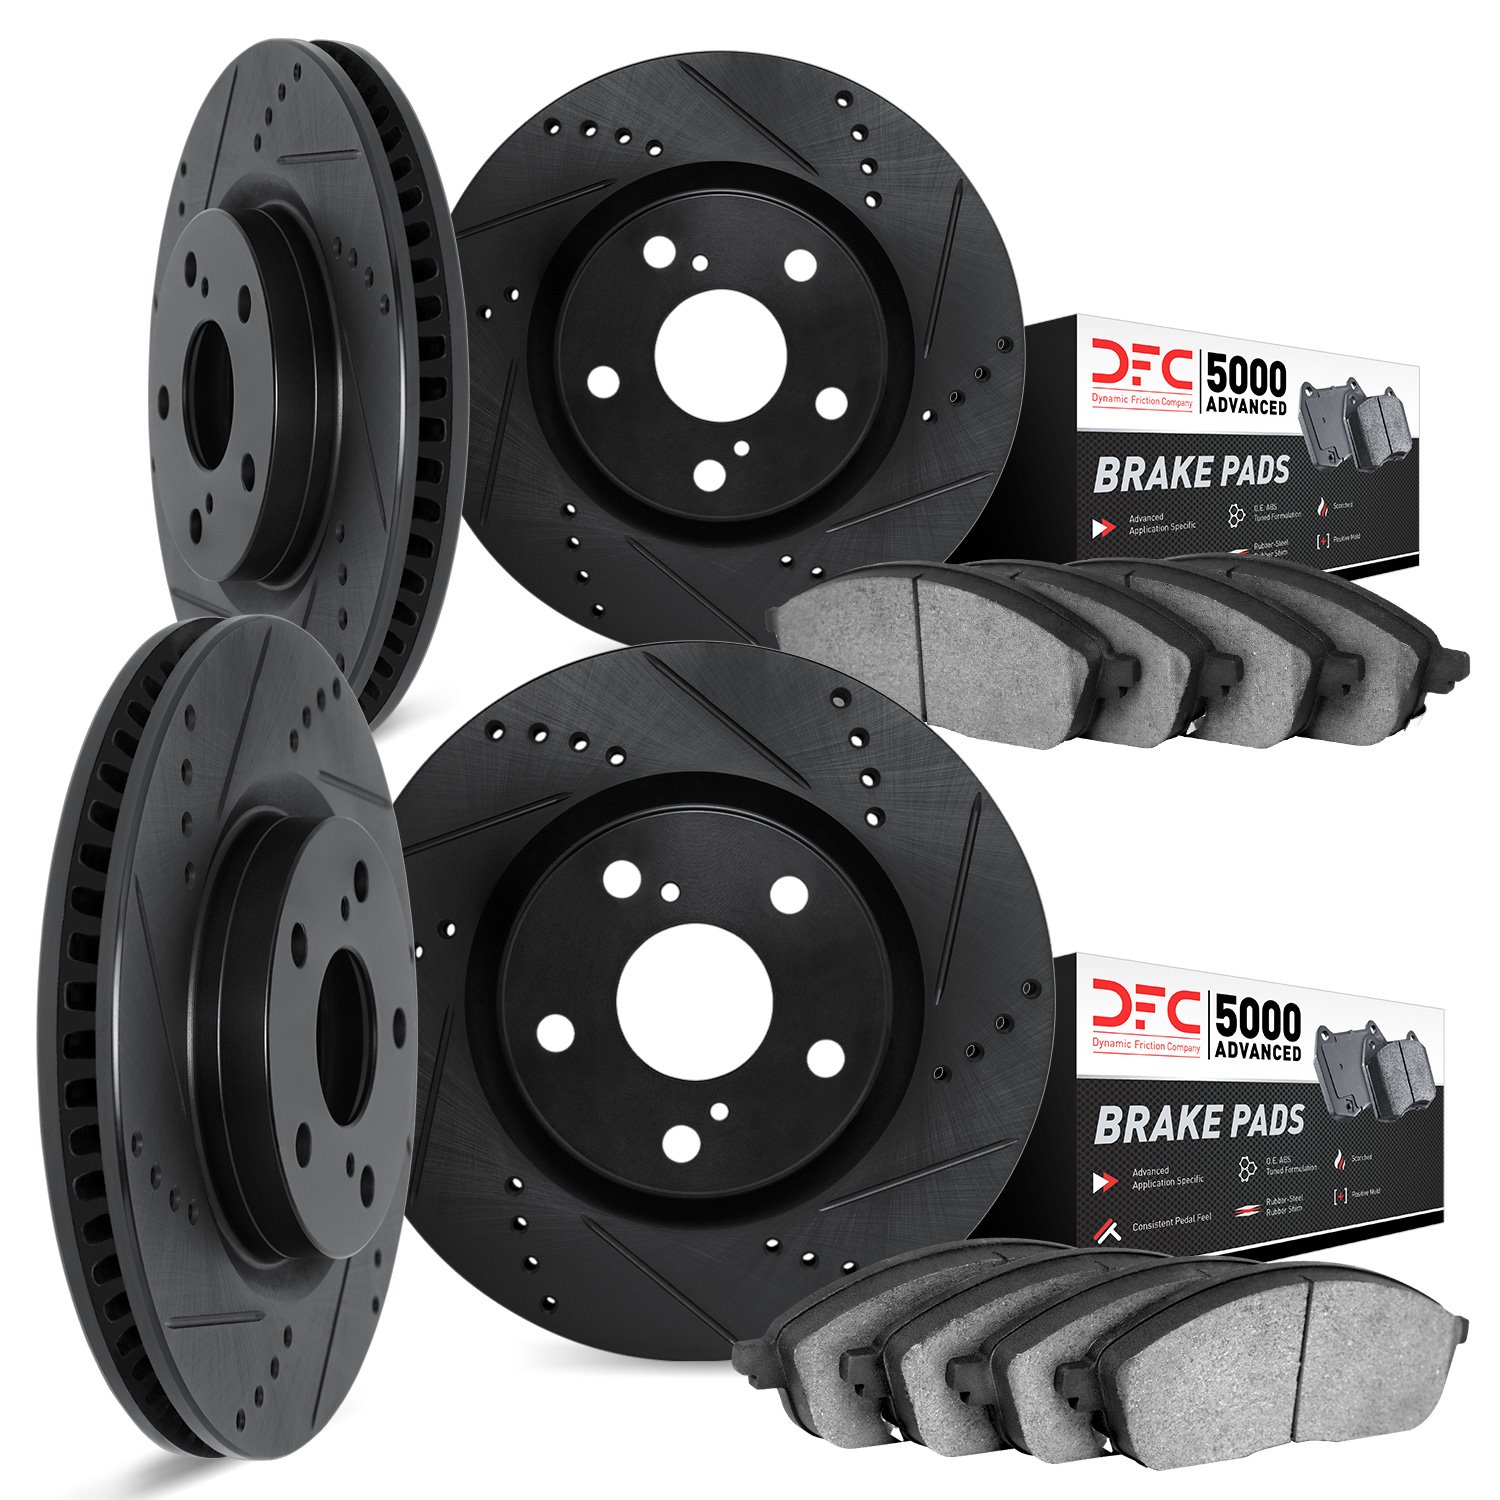 8504-68002 Drilled/Slotted Brake Rotors w/5000 Advanced Brake Pads Kit [Black], 1993-1997 Infiniti/Nissan, Position: Front and R